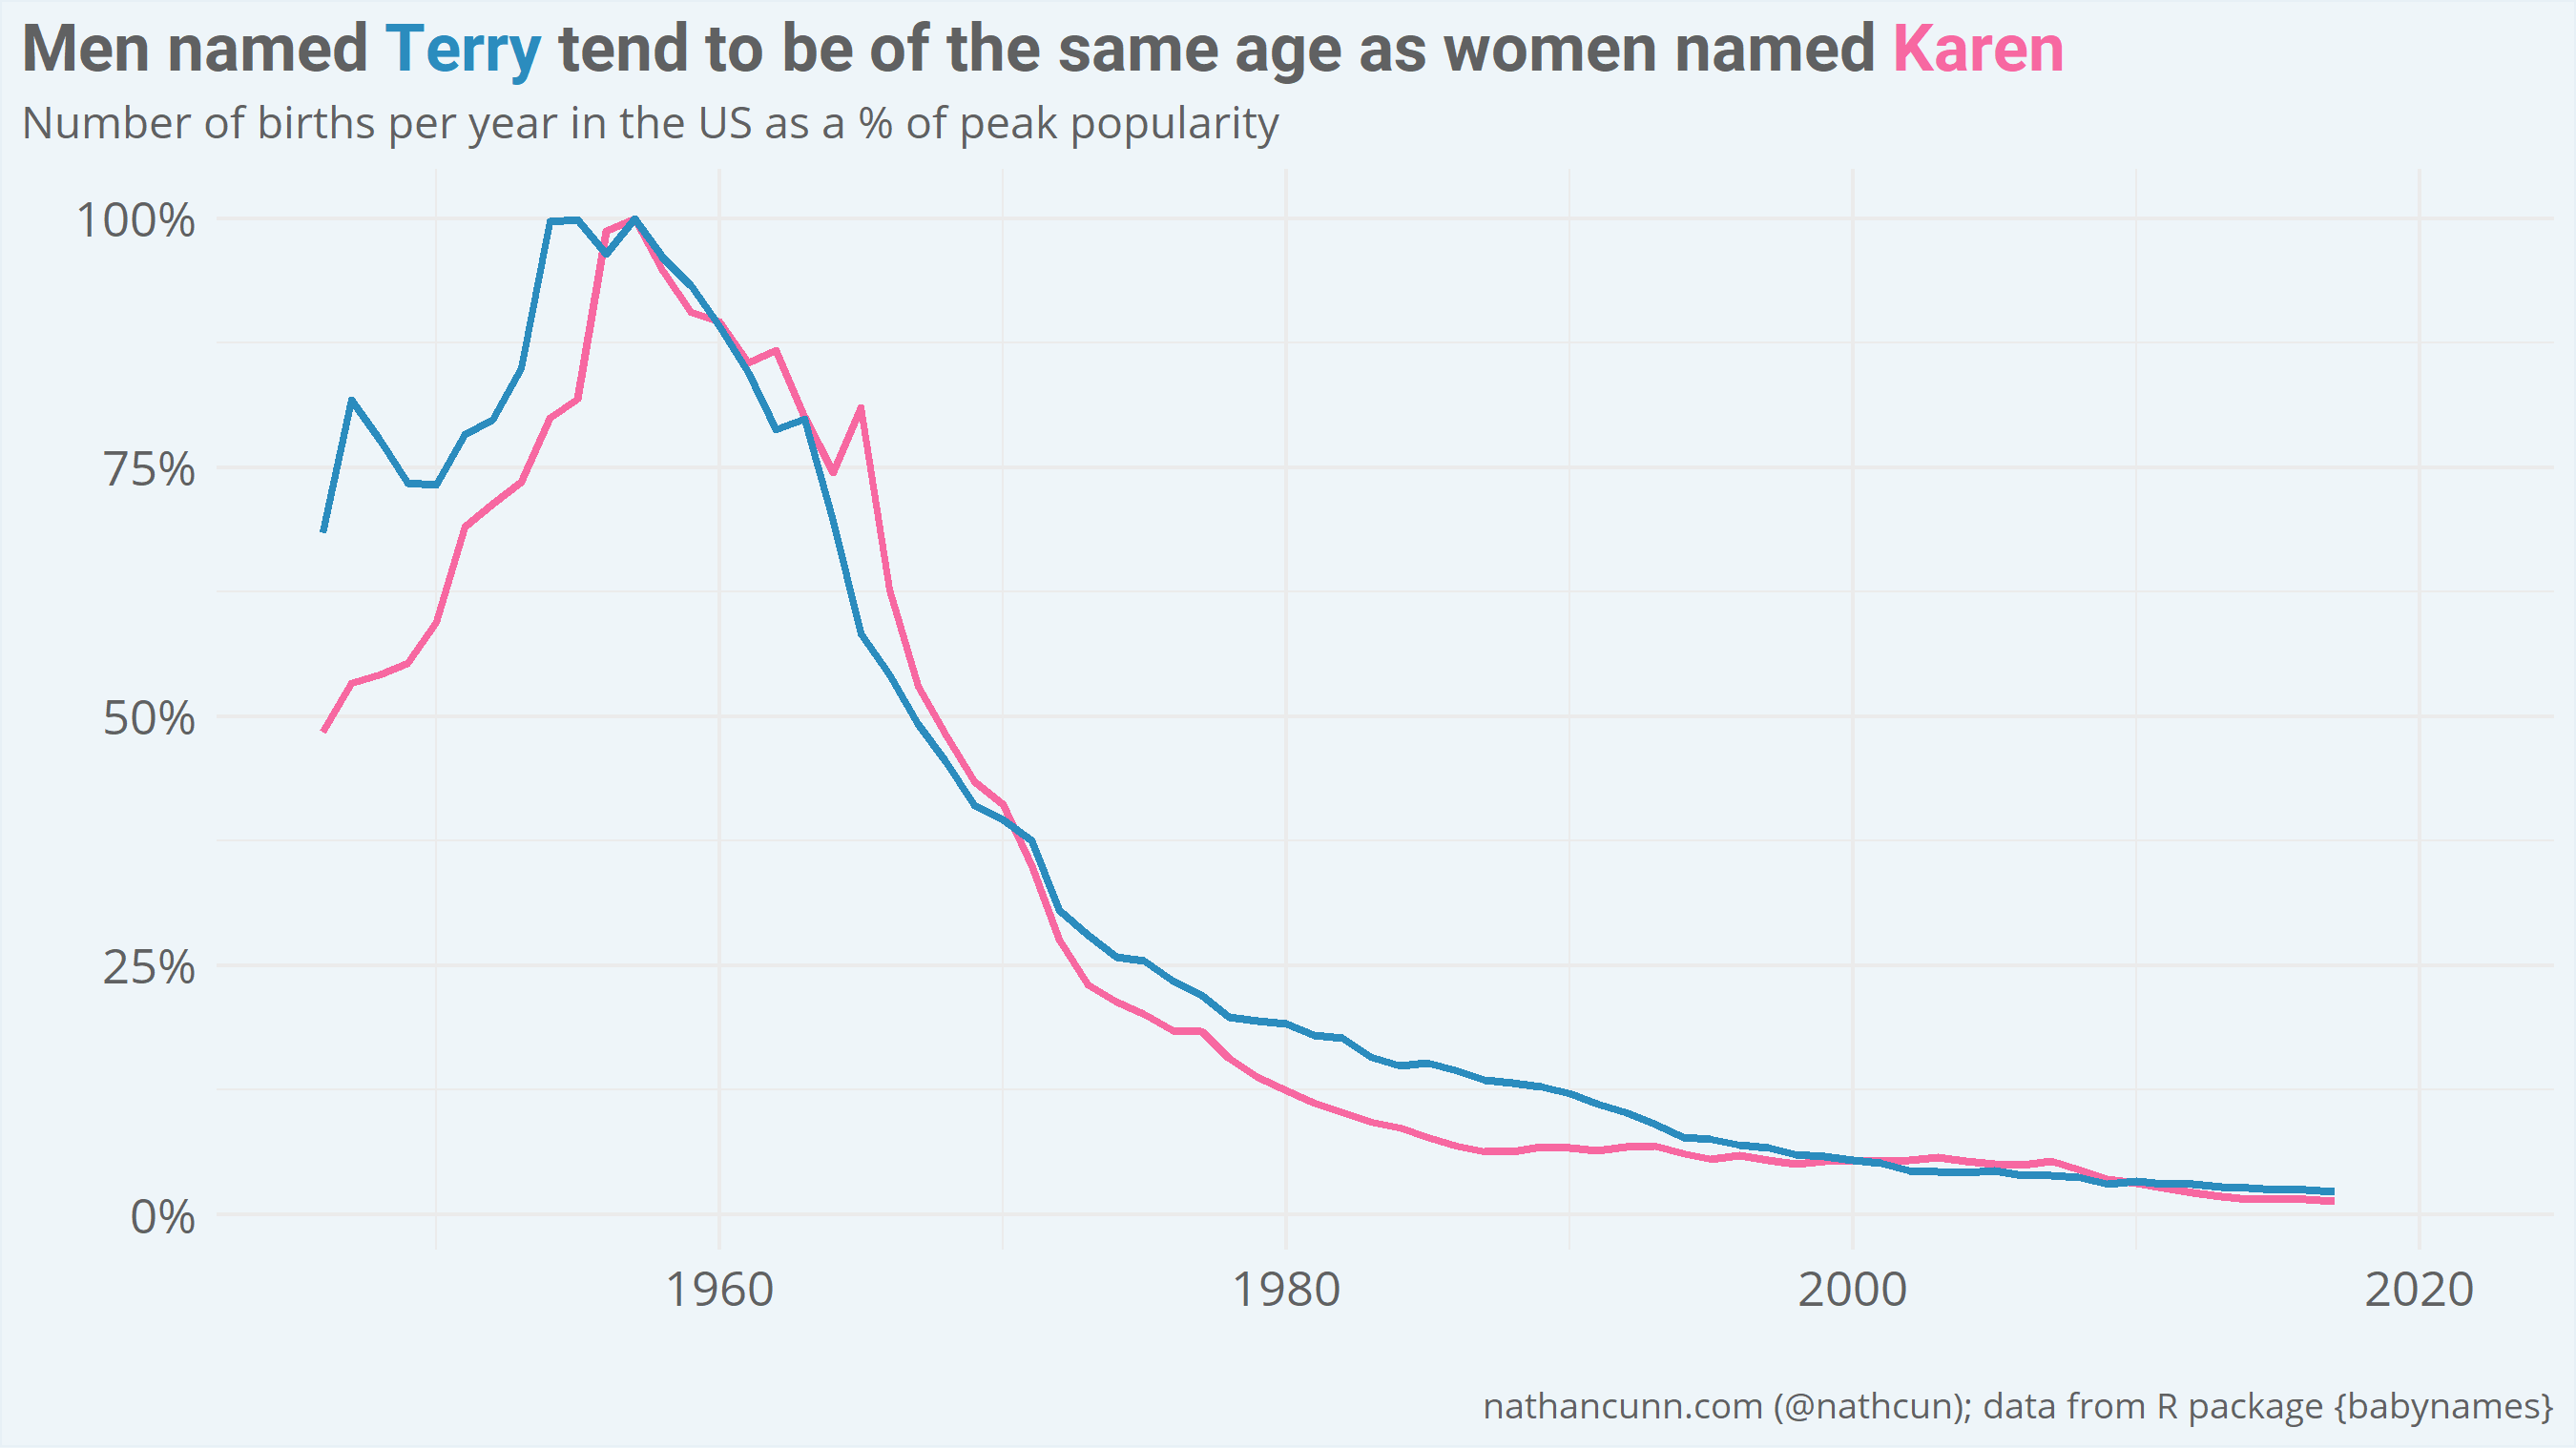 Line chart showing number of Anitas, Lynns, Pamelas, and Karens born per year in the US, with a peak occurring in the late 1950s, and decline from the late 1960s. All names show extremely similar patterns.